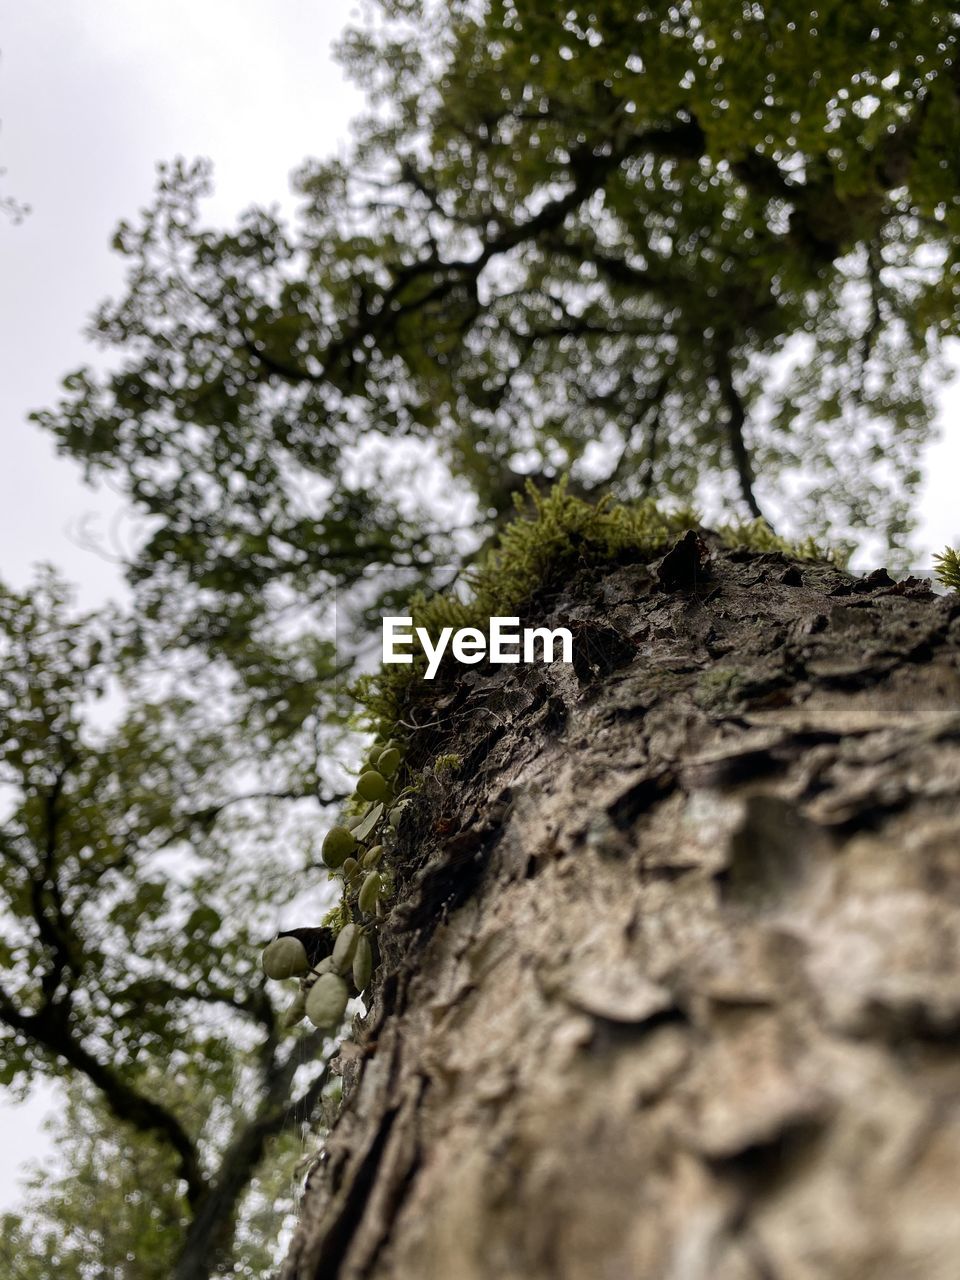 tree, plant, nature, low angle view, leaf, branch, tree trunk, no people, trunk, flower, green, growth, day, sky, outdoors, selective focus, close-up, beauty in nature, textured, plant bark, sunlight, land, forest, soil, tranquility, focus on foreground, rock, rough, bark